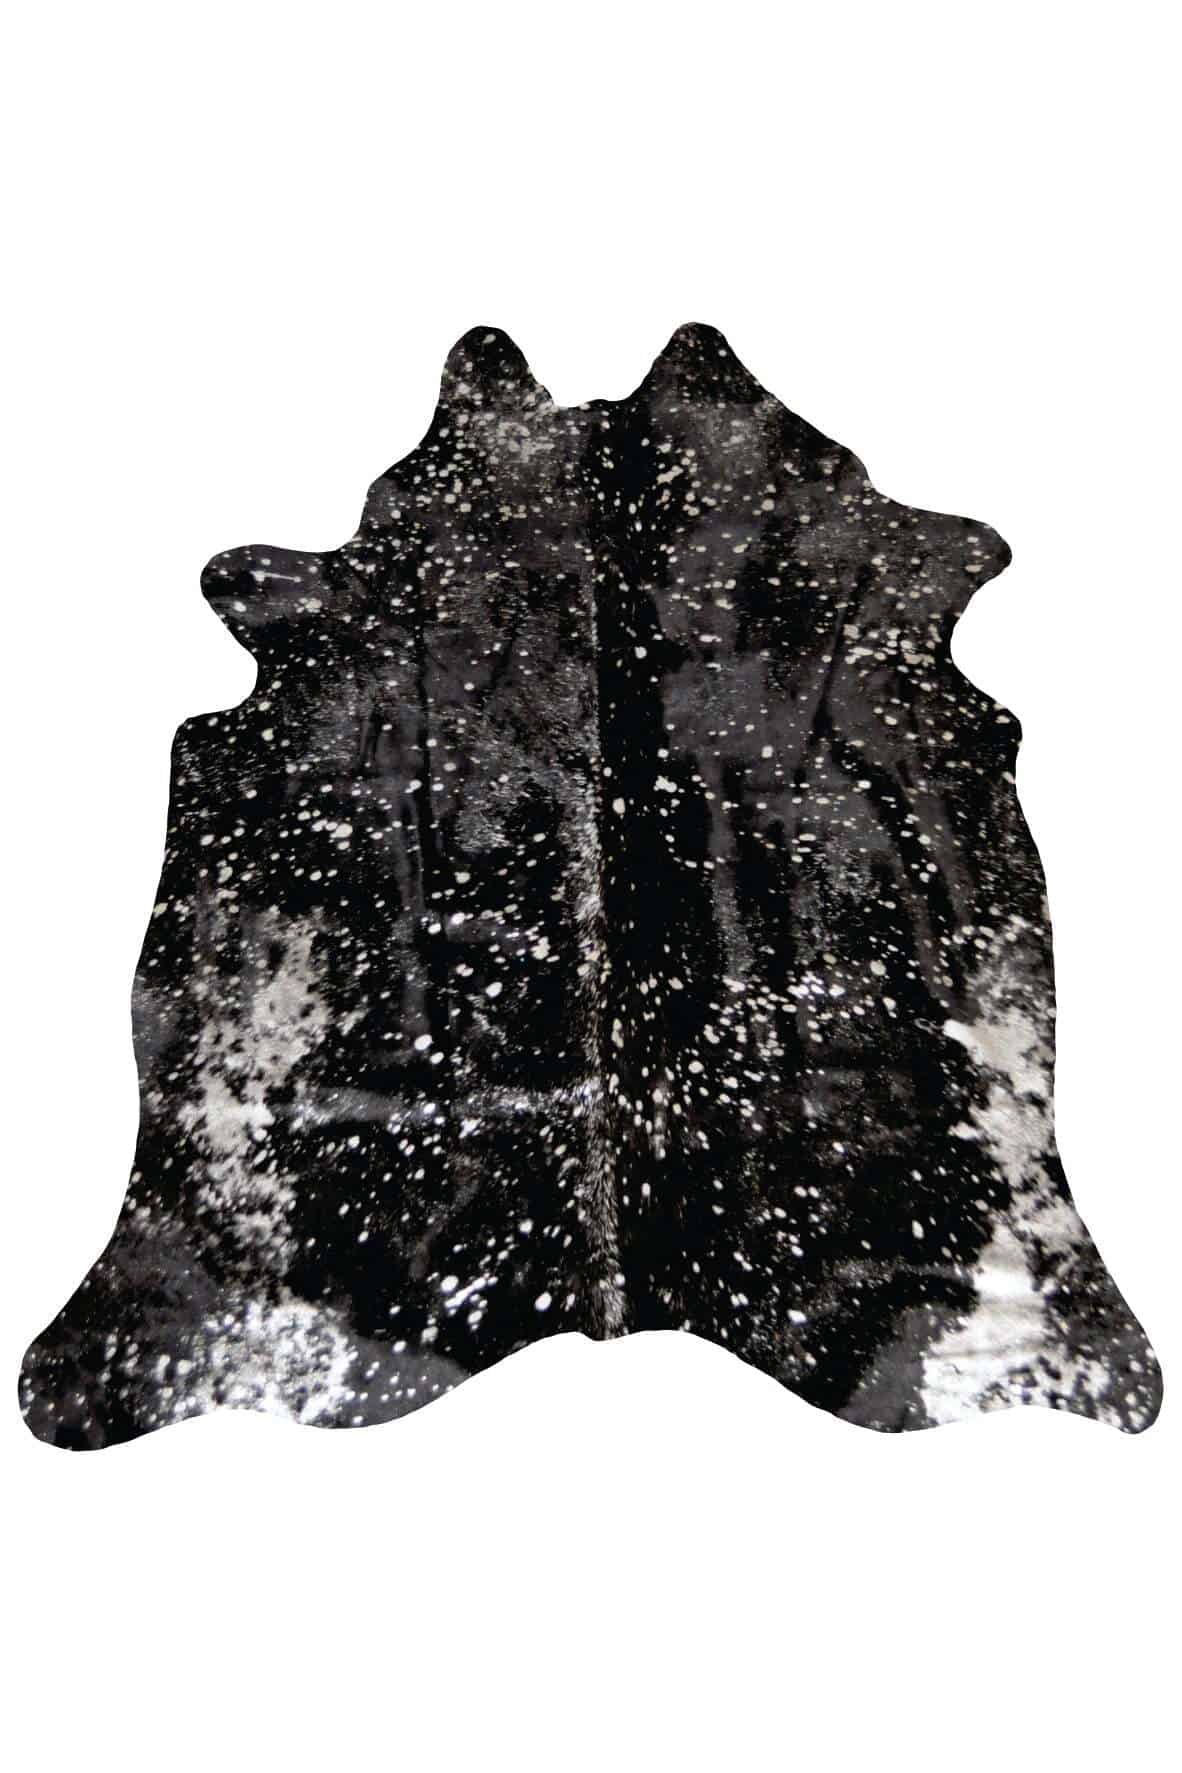 metallic black and silver cowhide